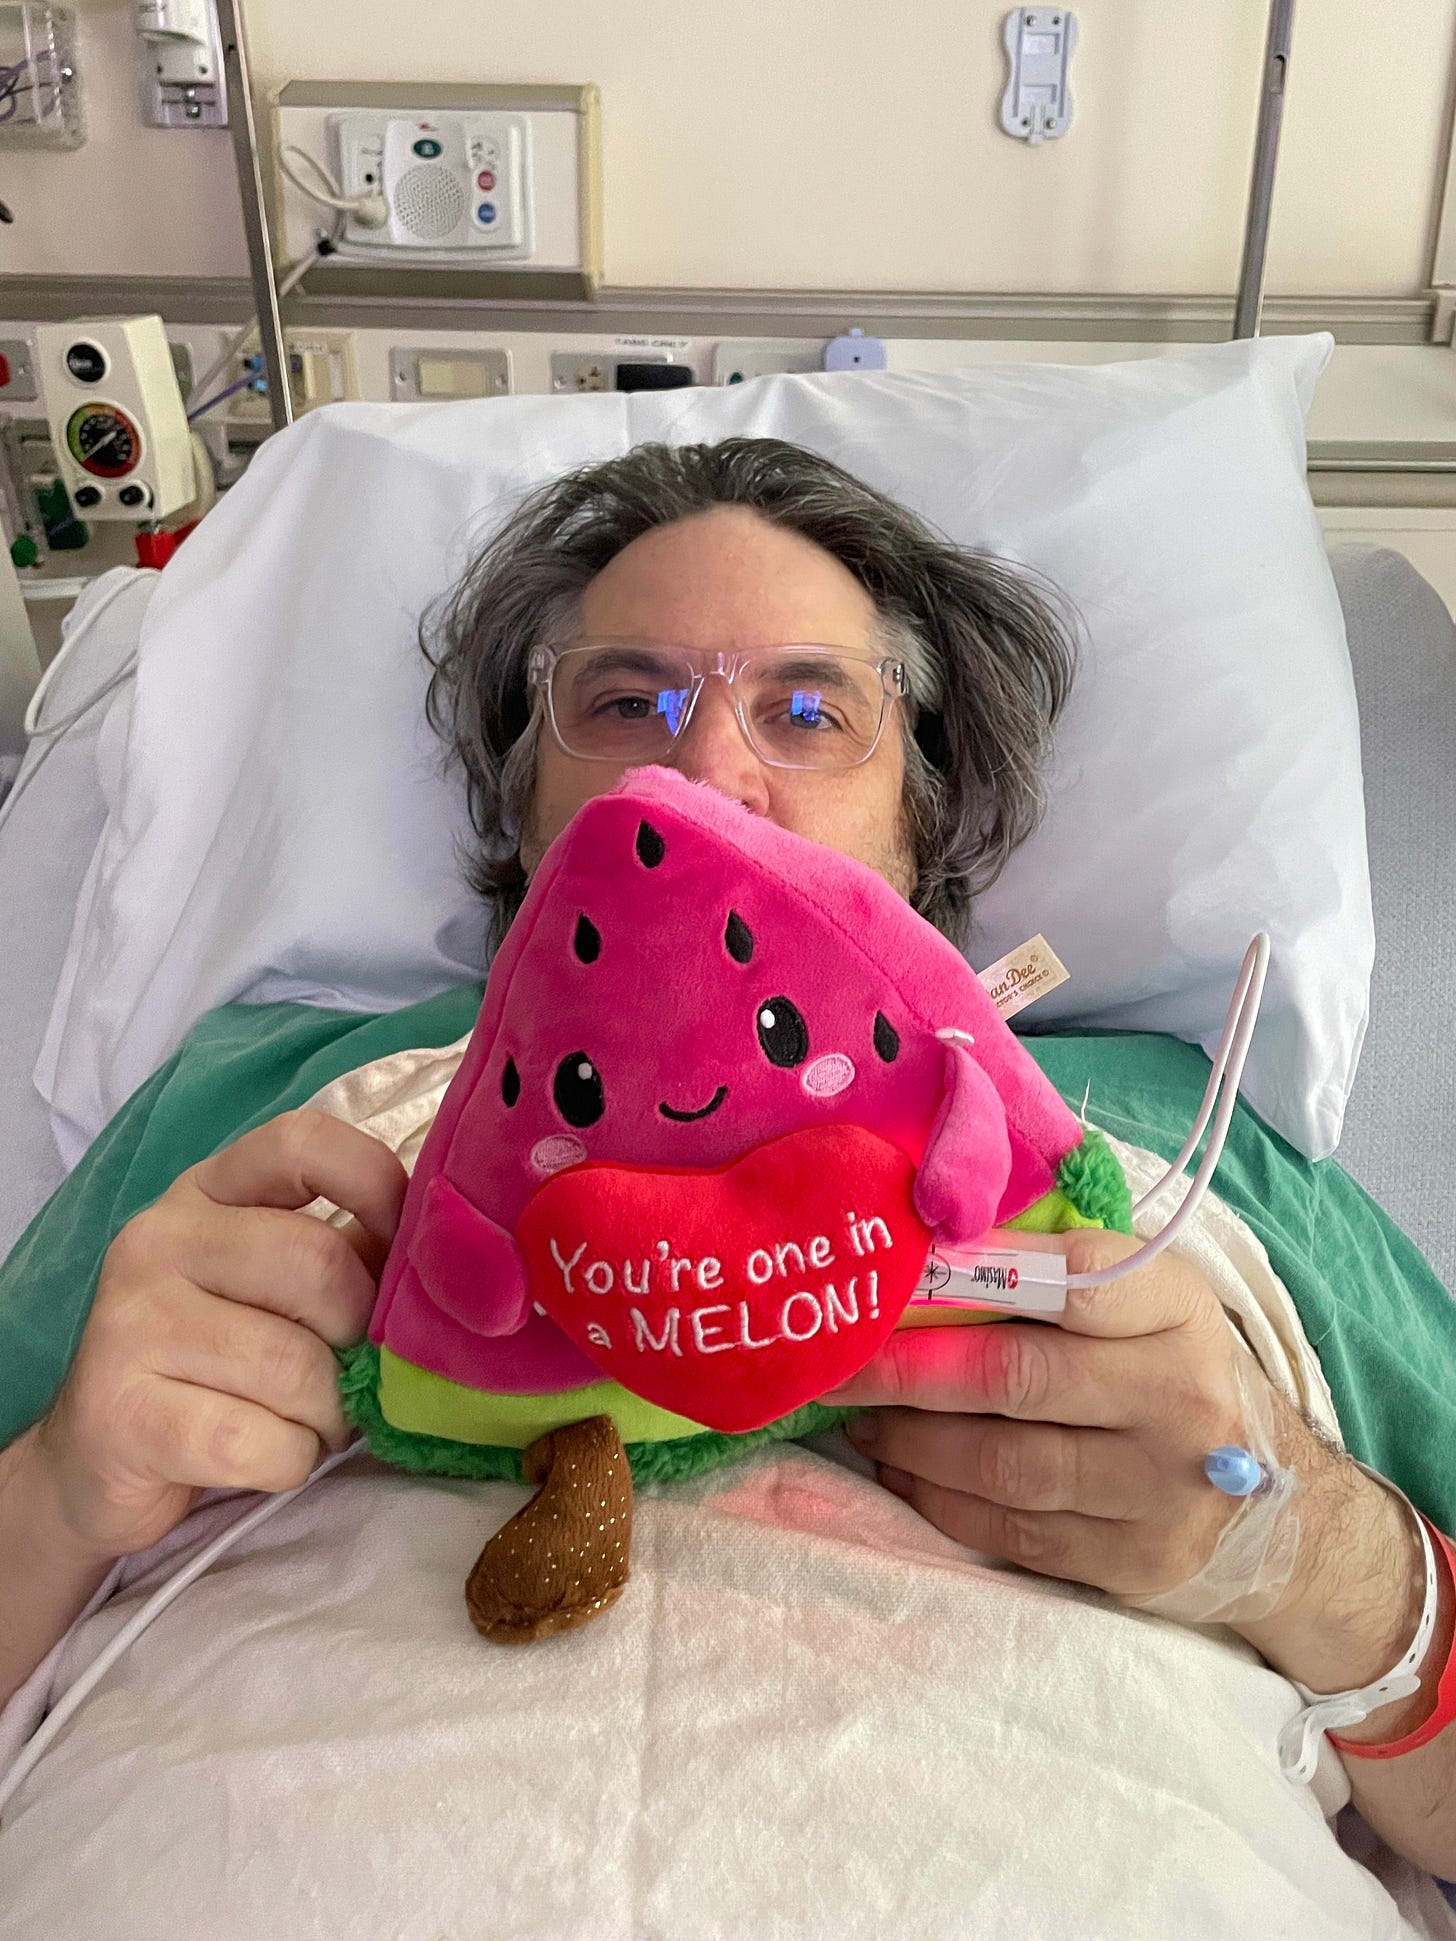 My dad lays in a hospital bed holding a plush watermelon toy that says You’re one in a melon.